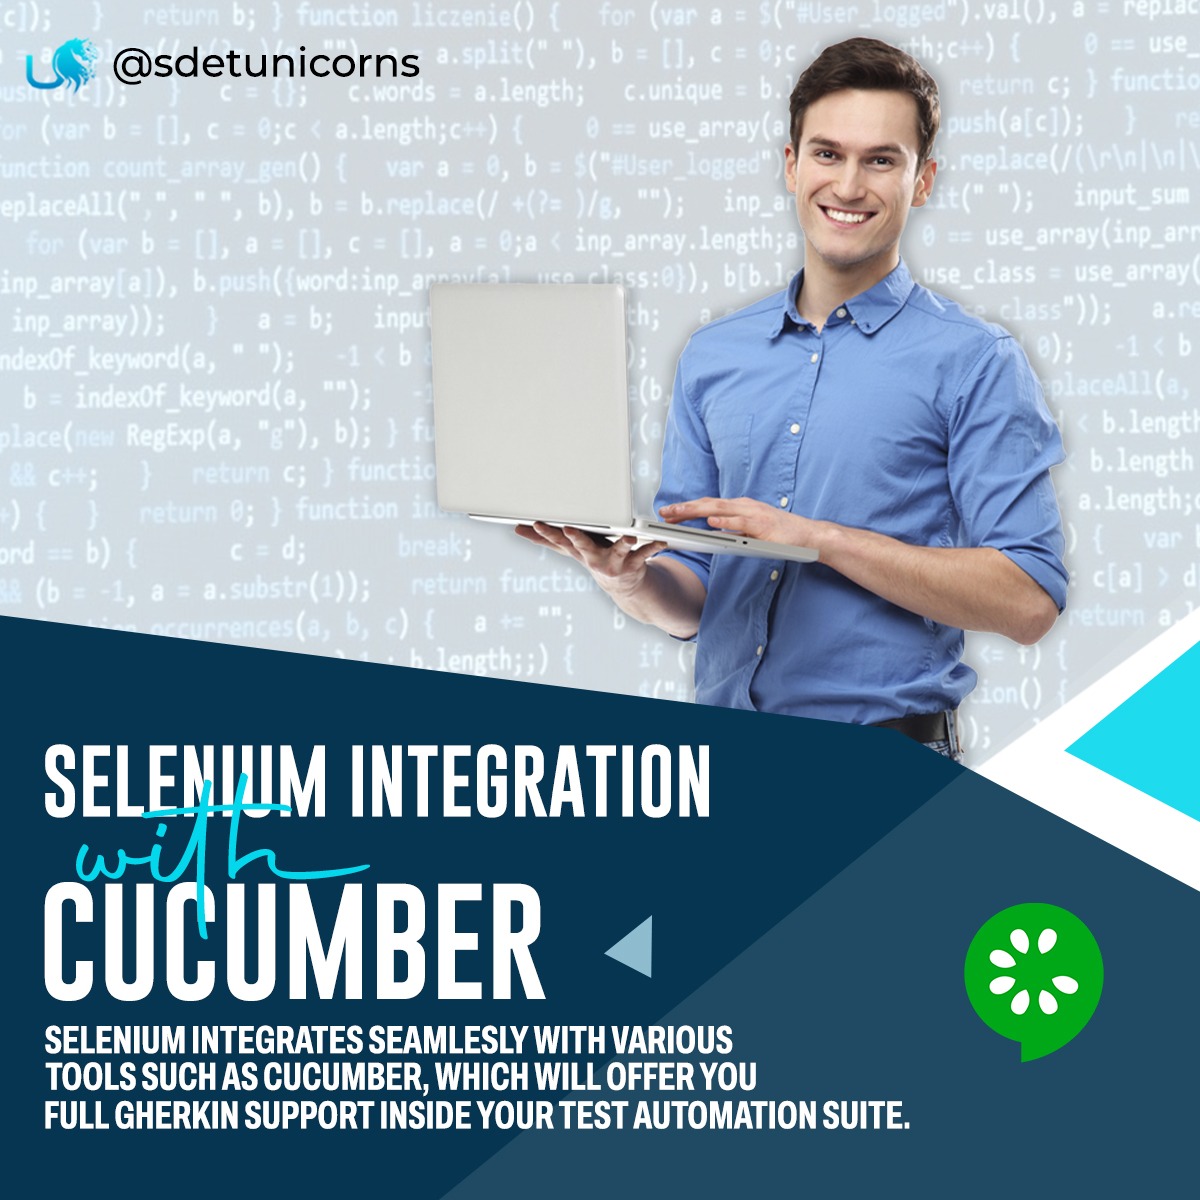 Selenium integrates seamlessly with various tools such as Cucumber, which will offer you full Gherkin support inside your test automation suite. 

#seleniumtesting #selenium #softwaretesting #seleniumwebdriver